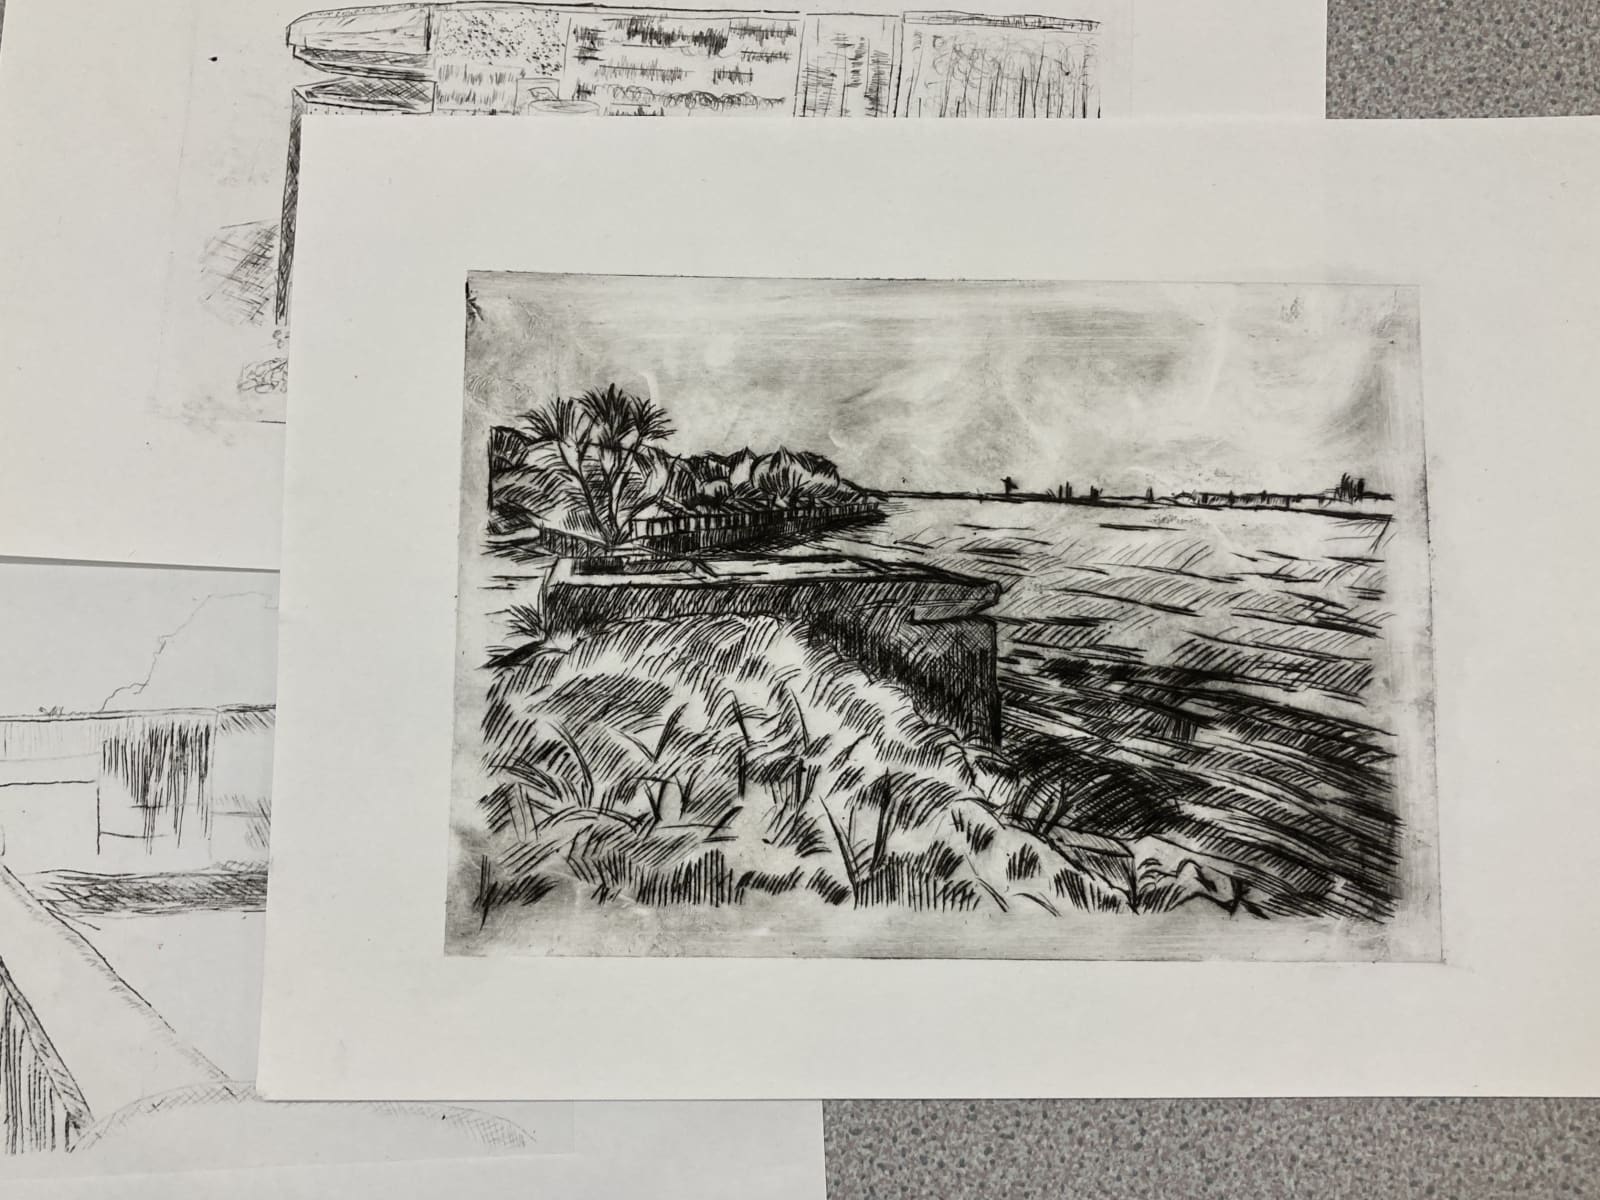 Thursday 28th July 12.30 am – 2.30pm Etching Printing Want to learn how to make a fabulous print? Come learn a safe non-toxic form of etching (dry-point), use an image we make and learn how to create it multiple times with our wonderful printing press.